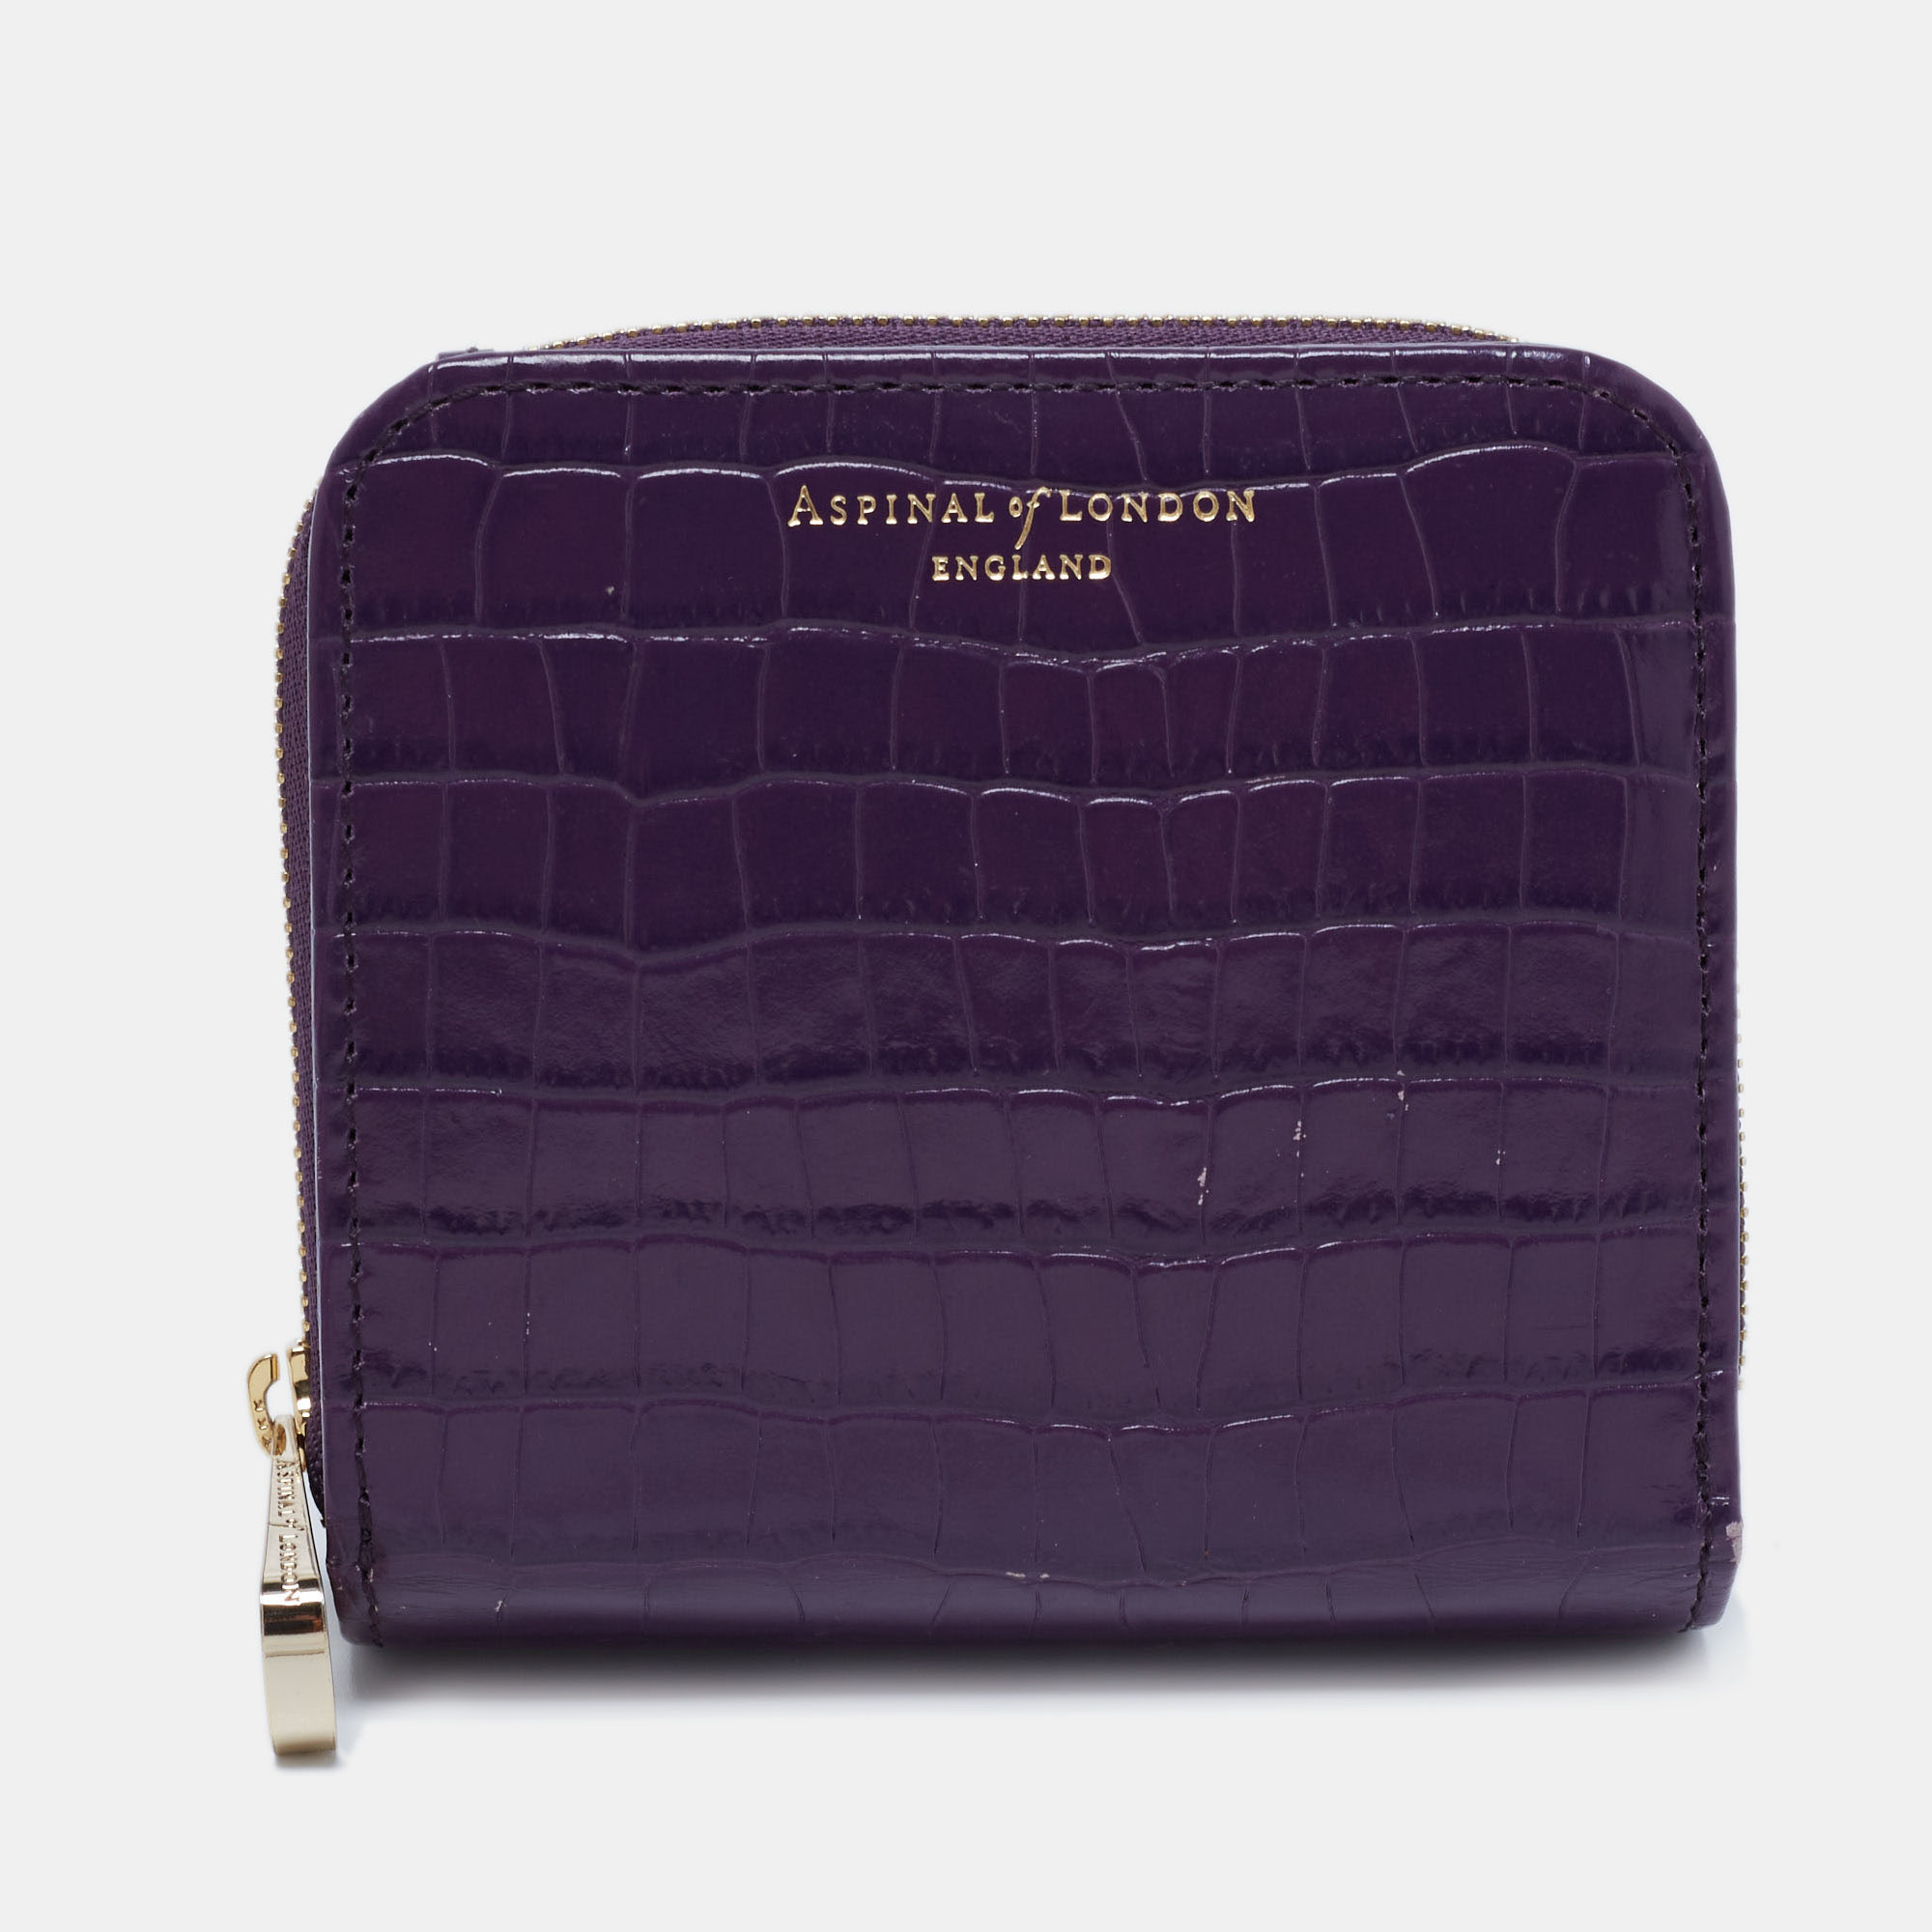 aspinal of london purple croc embossed leather zip around compact wallet